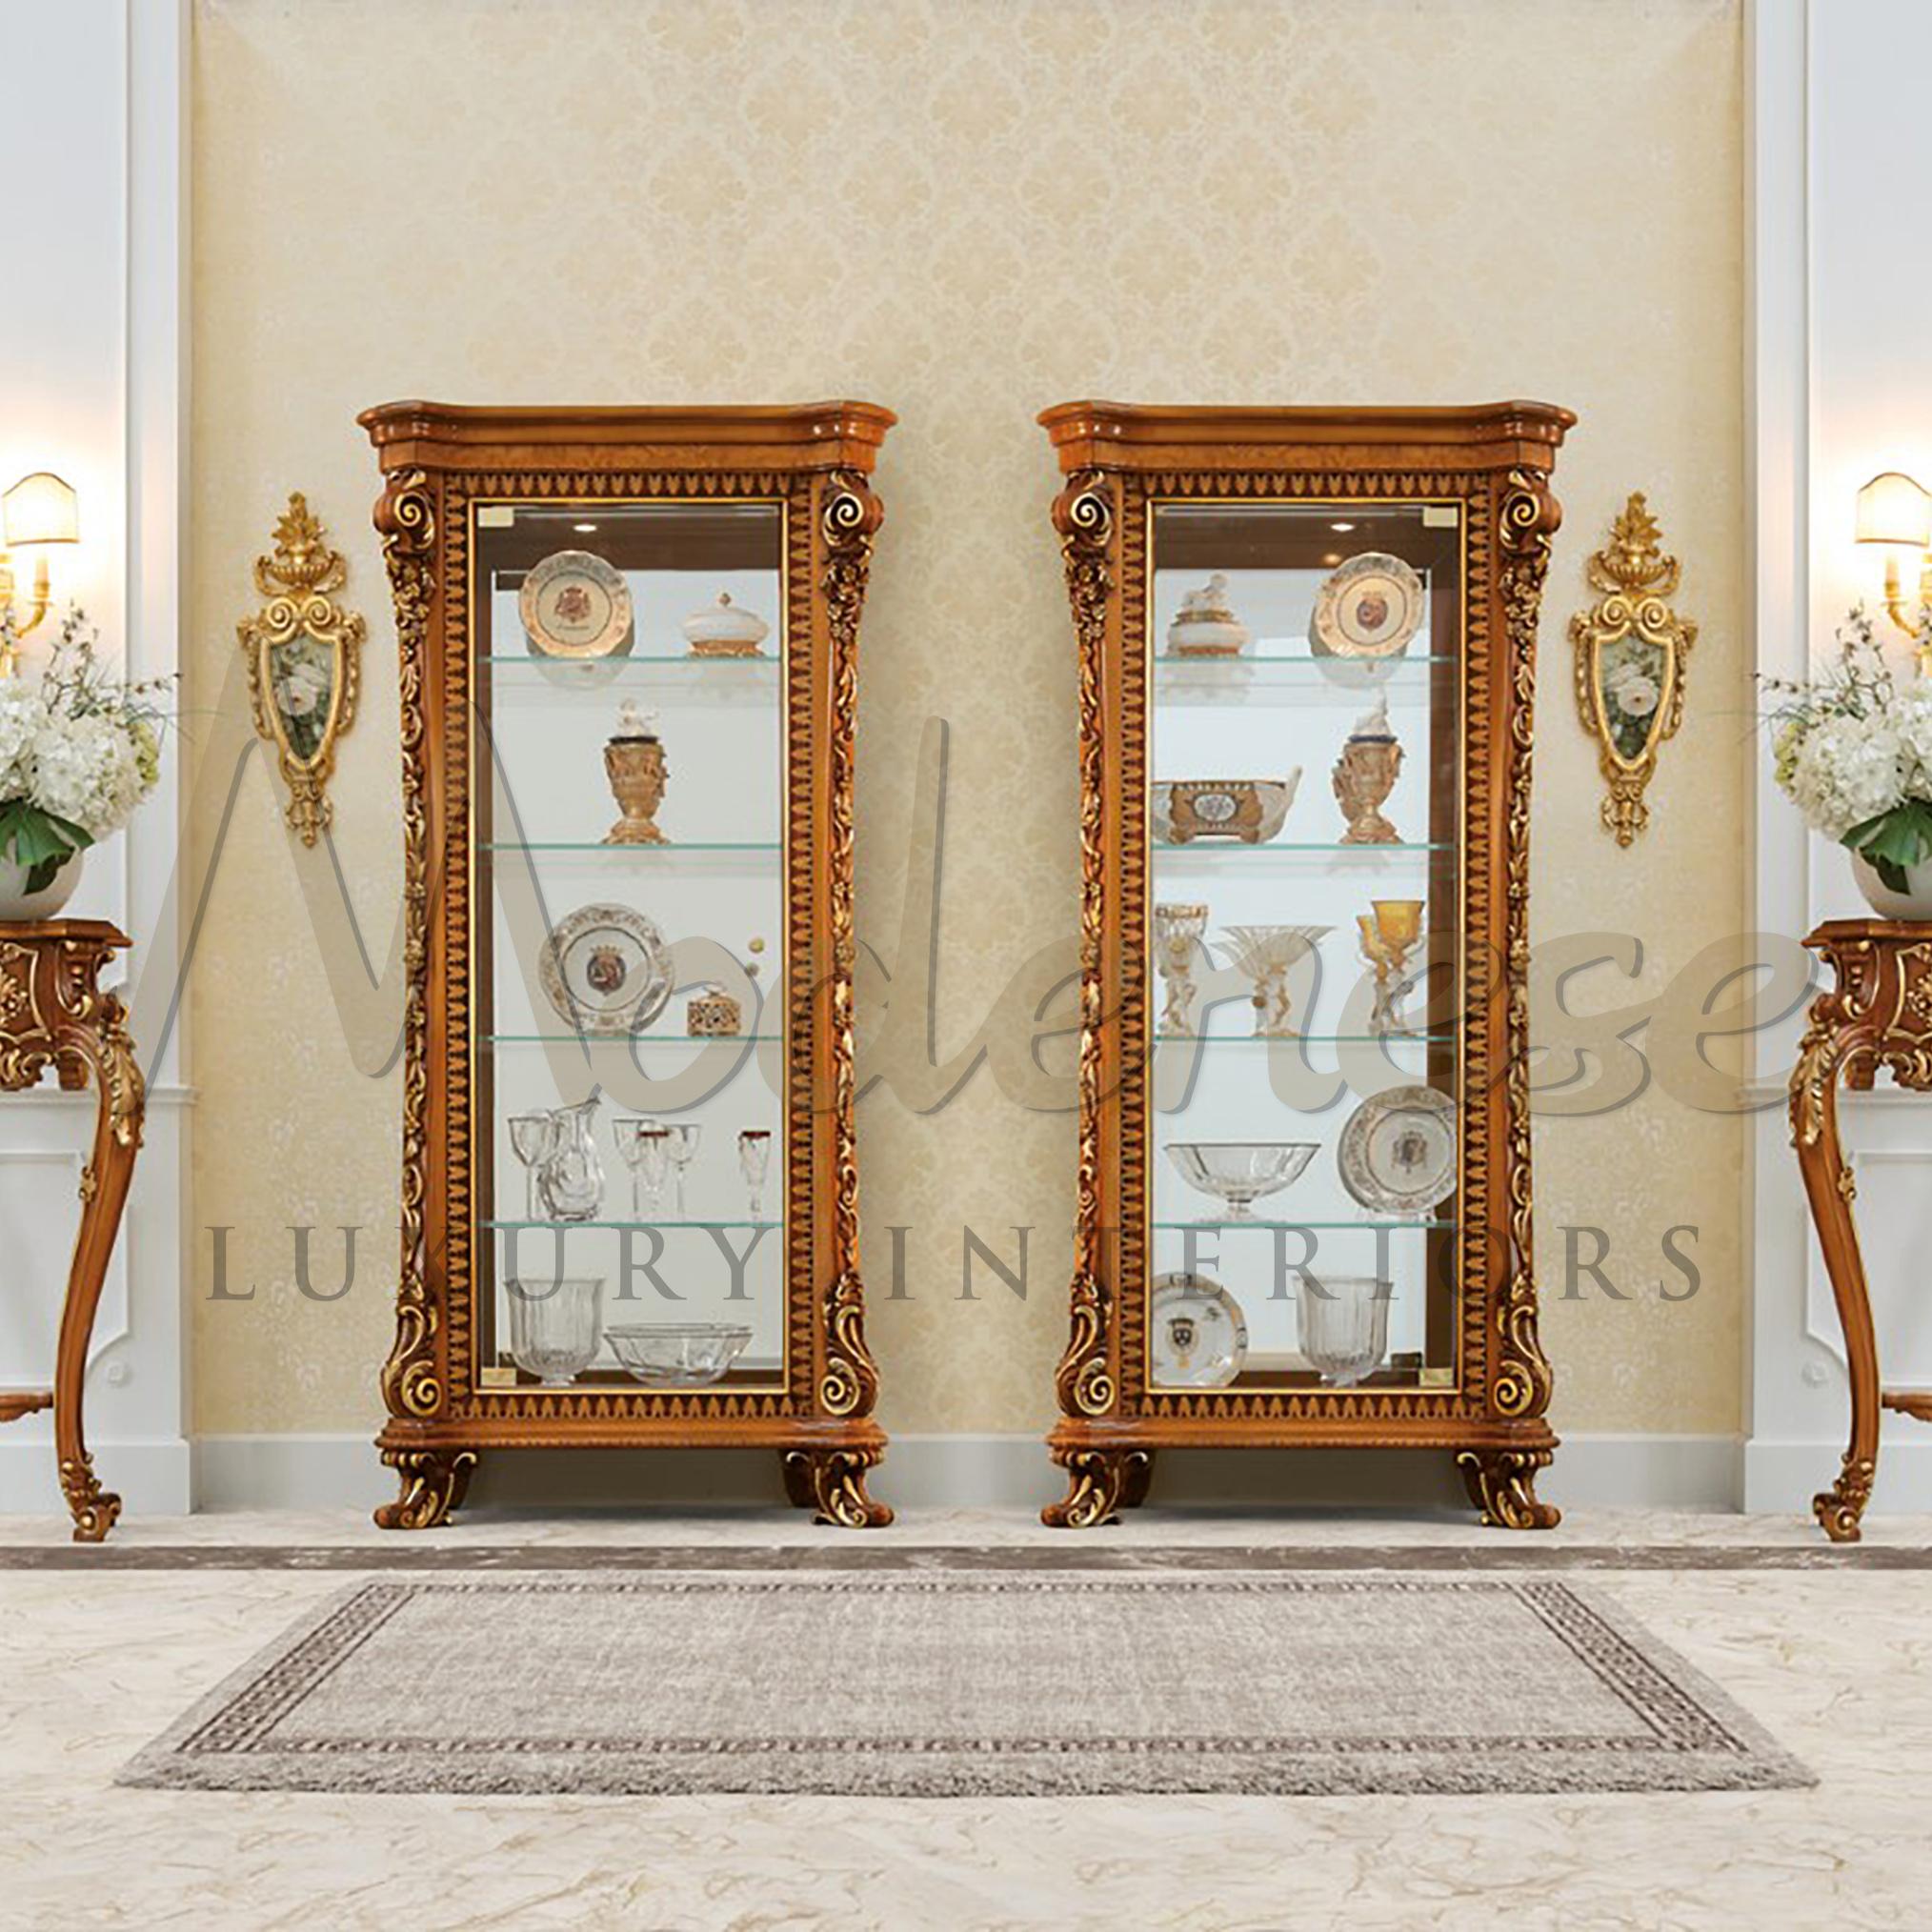 Modenese Luxury Interiors is proud to promote his production and design services by showing you this wondeful baroque vitrine for dining rooms. Its wide glass surfaces are ideal for big house areas and dining atmoshperes, where the light for